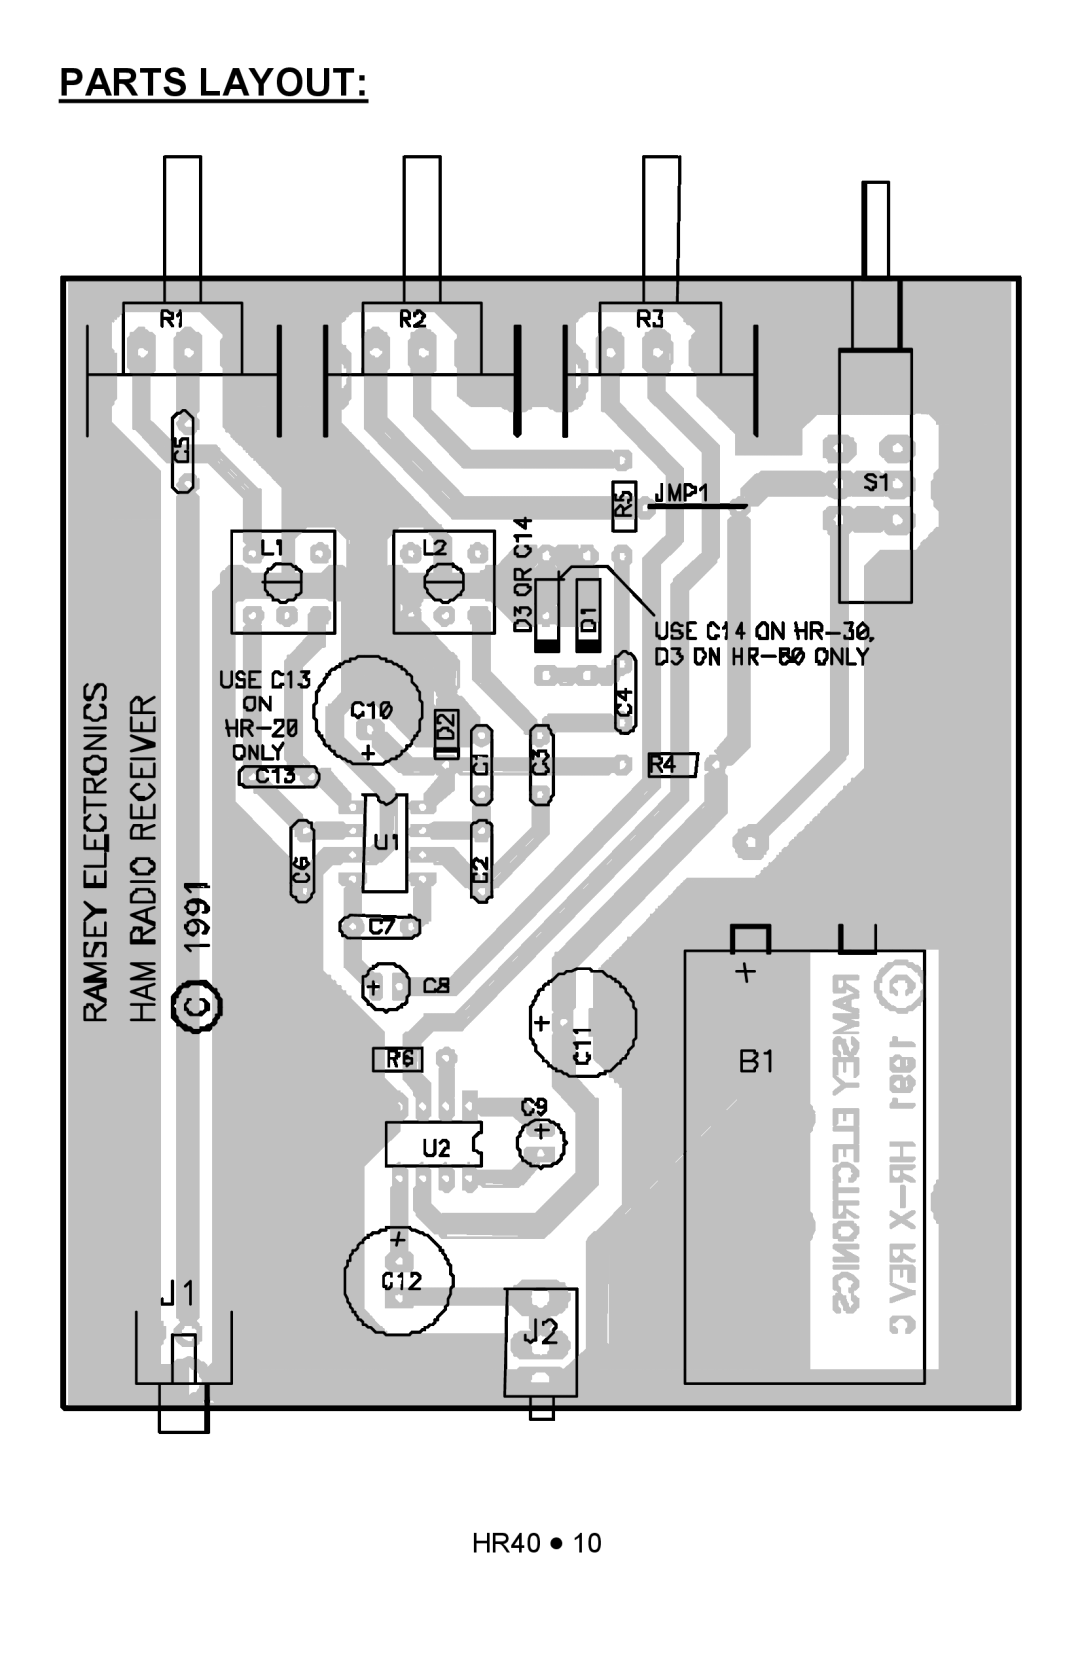 Ramsey Electronics HR40 manual Parts Layout 